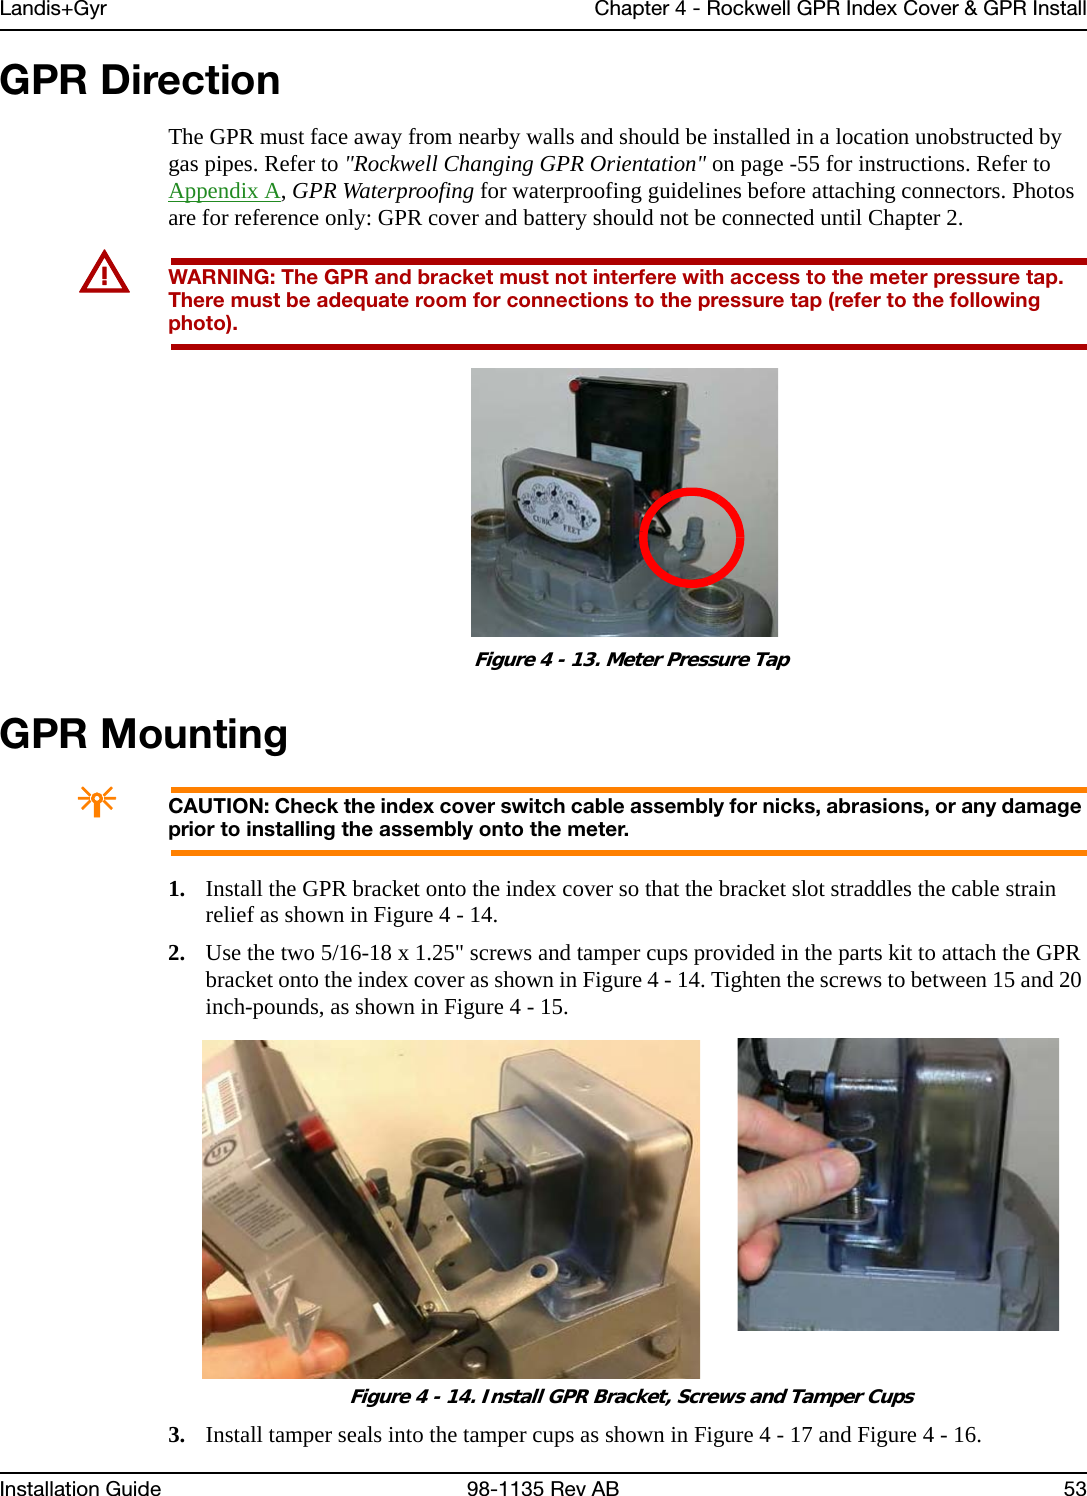 Landis+Gyr Chapter 4 - Rockwell GPR Index Cover &amp; GPR InstallInstallation Guide 98-1135 Rev AB 53GPR DirectionThe GPR must face away from nearby walls and should be installed in a location unobstructed by gas pipes. Refer to &quot;Rockwell Changing GPR Orientation&quot; on page -55 for instructions. Refer to Appendix A, GPR Waterproofing for waterproofing guidelines before attaching connectors. Photos are for reference only: GPR cover and battery should not be connected until Chapter 2.UWARNING: The GPR and bracket must not interfere with access to the meter pressure tap. There must be adequate room for connections to the pressure tap (refer to the following photo). Figure 4 - 13. Meter Pressure TapGPR MountingACAUTION: Check the index cover switch cable assembly for nicks, abrasions, or any damage prior to installing the assembly onto the meter.1. Install the GPR bracket onto the index cover so that the bracket slot straddles the cable strain relief as shown in Figure 4 - 14.2. Use the two 5/16-18 x 1.25&quot; screws and tamper cups provided in the parts kit to attach the GPR bracket onto the index cover as shown in Figure 4 - 14. Tighten the screws to between 15 and 20 inch-pounds, as shown in Figure 4 - 15. Figure 4 - 14. Install GPR Bracket, Screws and Tamper Cups3. Install tamper seals into the tamper cups as shown in Figure 4 - 17 and Figure 4 - 16.